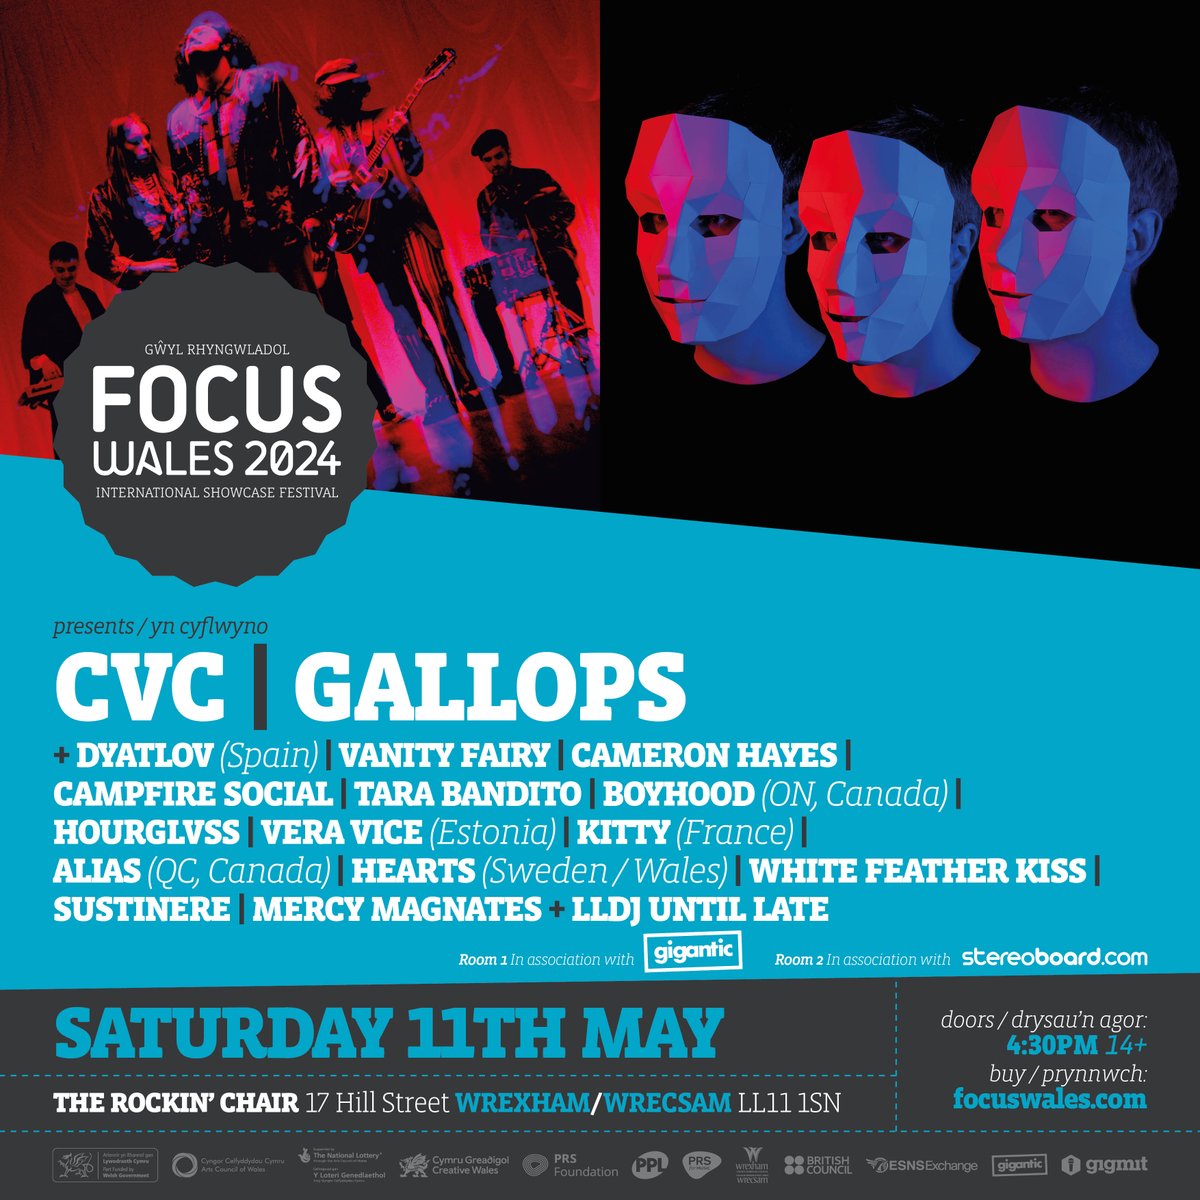 🎪 we're delighted to welcome @GALLOPS to this huge lineup on Saturday night at The Rockin' Chair #Wrexham for FOCUS Wales 2024! Festival tickets are close to selling out, so get them while you can at focuswales.com